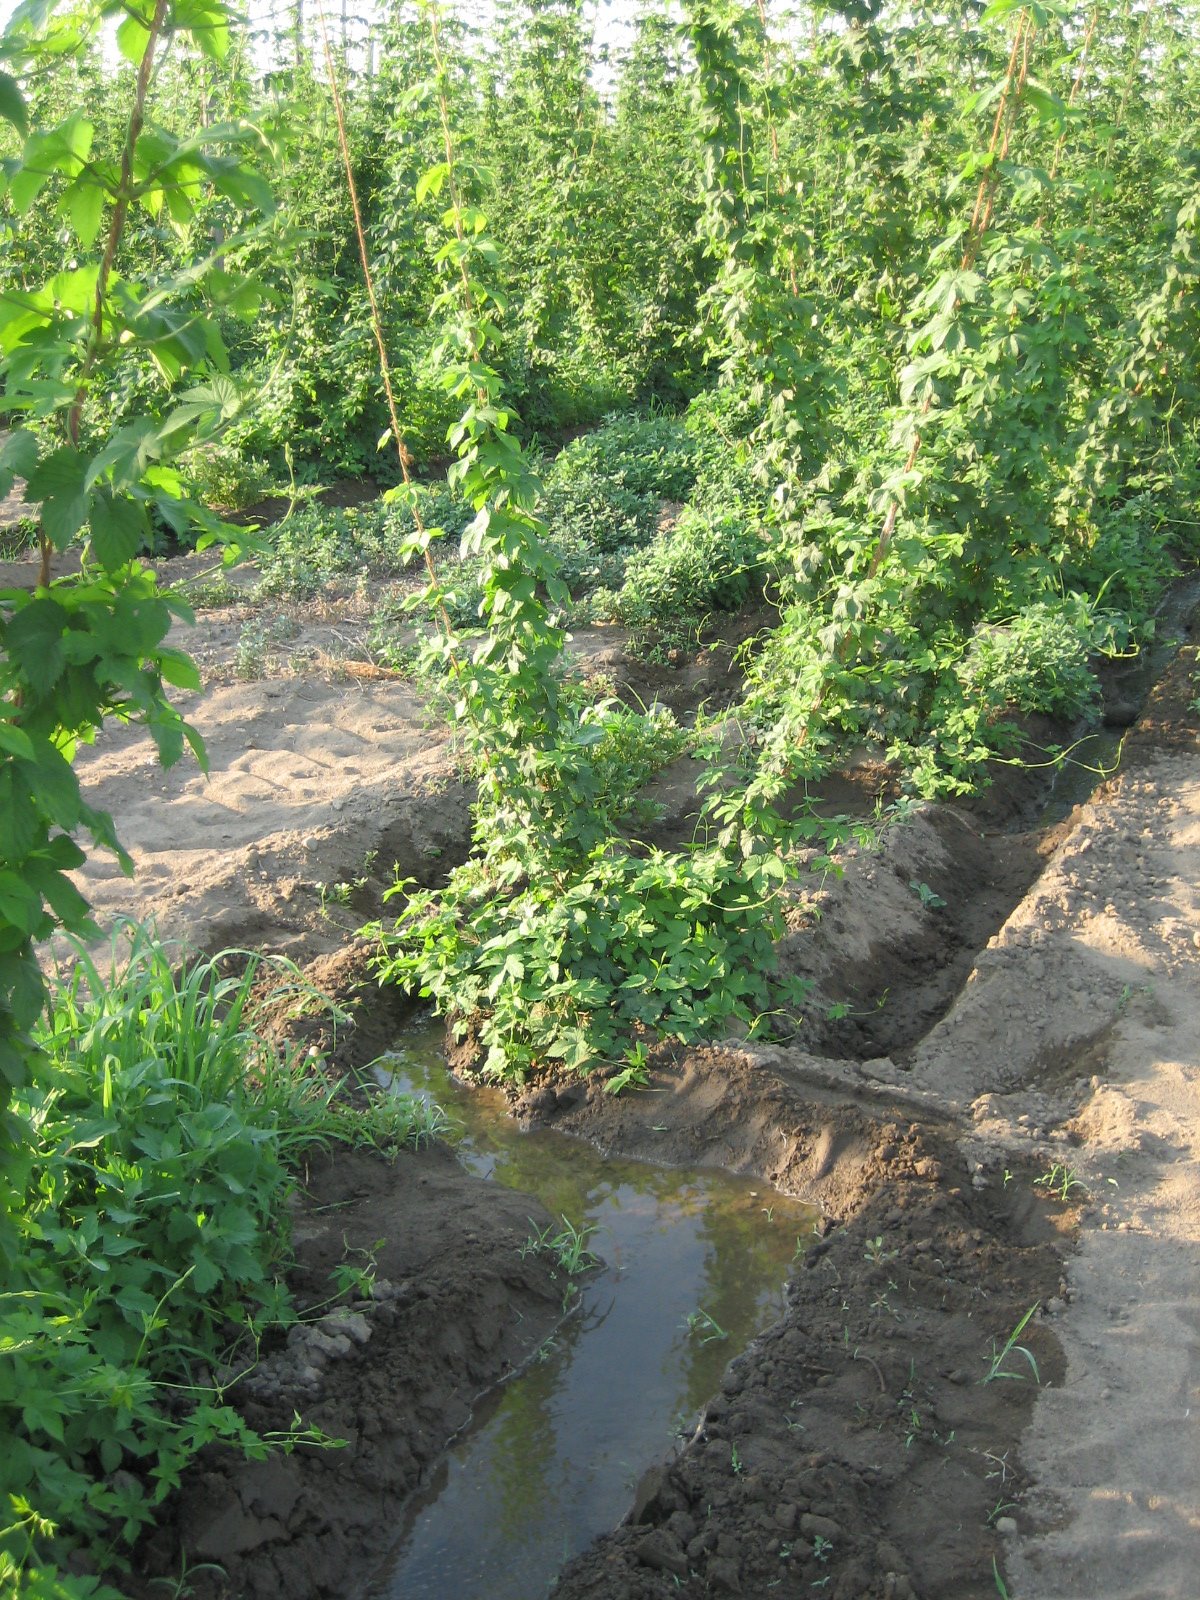 [Ditch+bent+to+help+out+smaller+hops+July+2008.jpg]